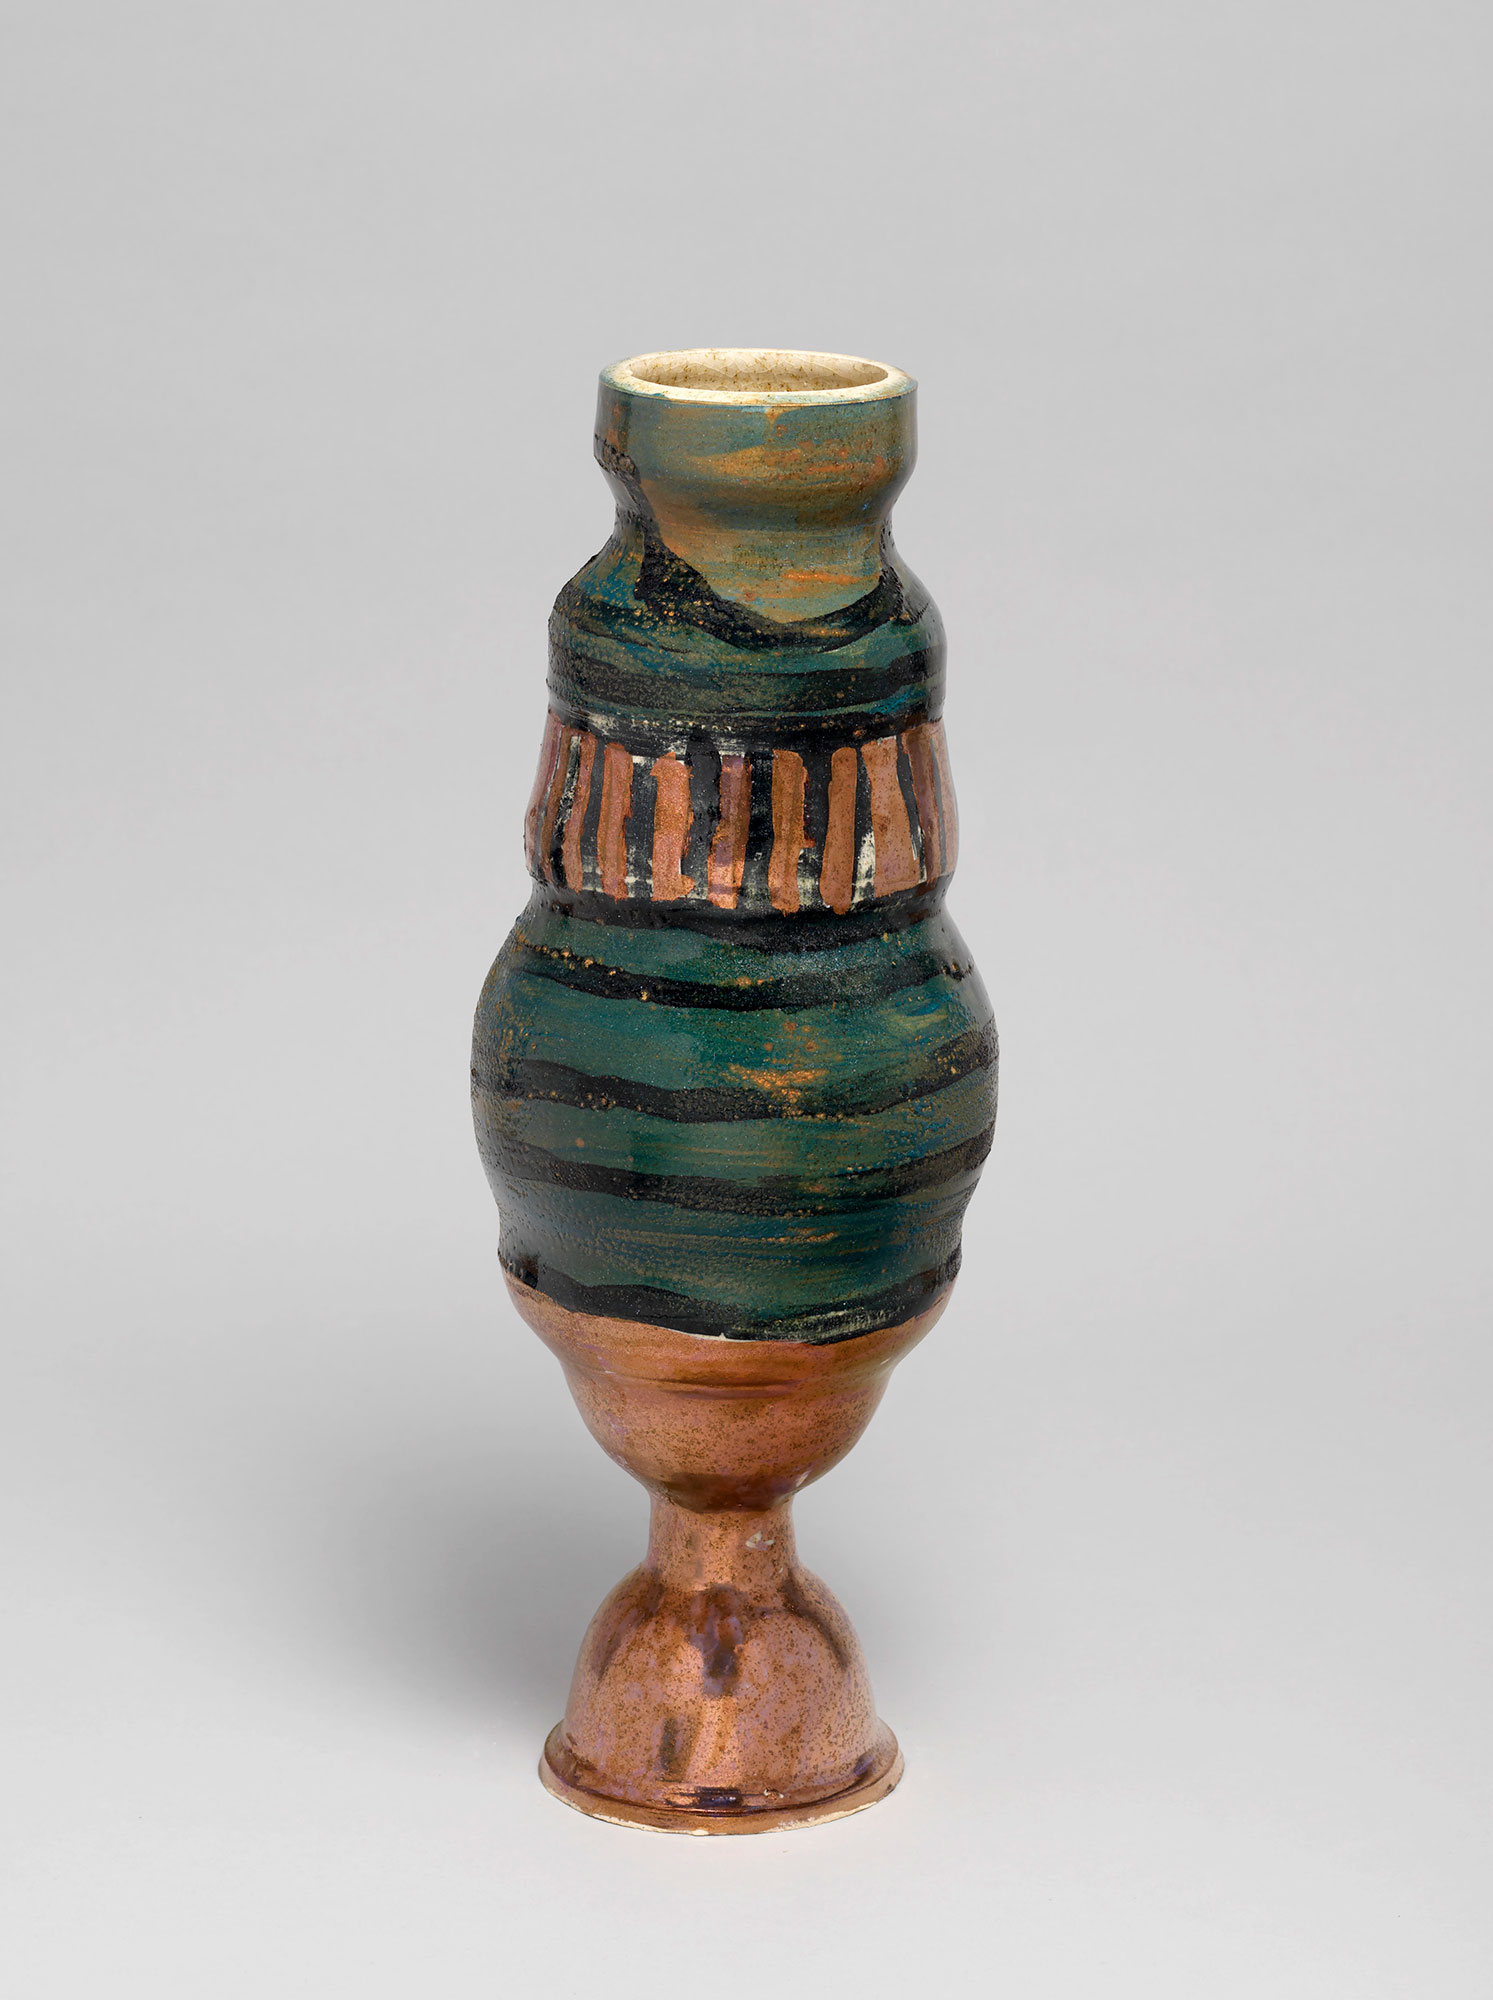 A vase with a base painted bronze, while the body is dark green and orange with black lines.